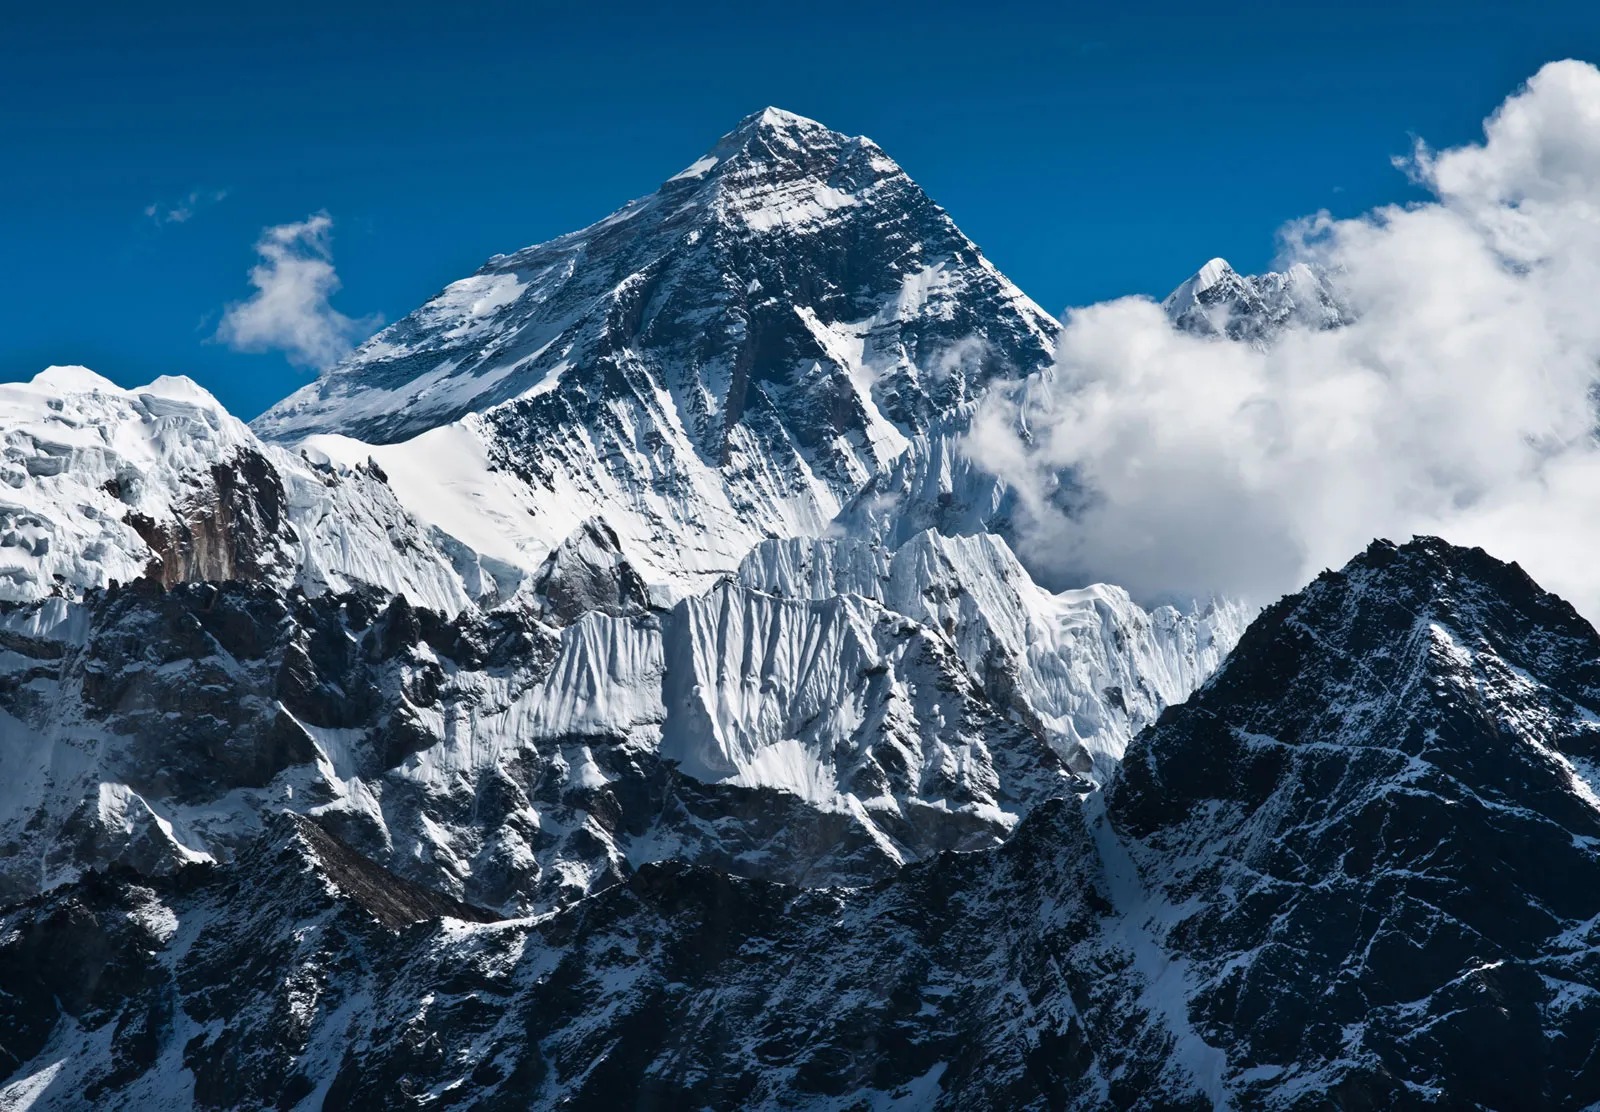 70 years ago, people conquered Everest for the first time. They were New Zealander Edmund Hillary and Nepalese Sherpa Tenzing Norgay. The news about the event was withheld until June 2 - the day of the coronation of Elizabeth II (who was, in particular, the queen of New Zealand).